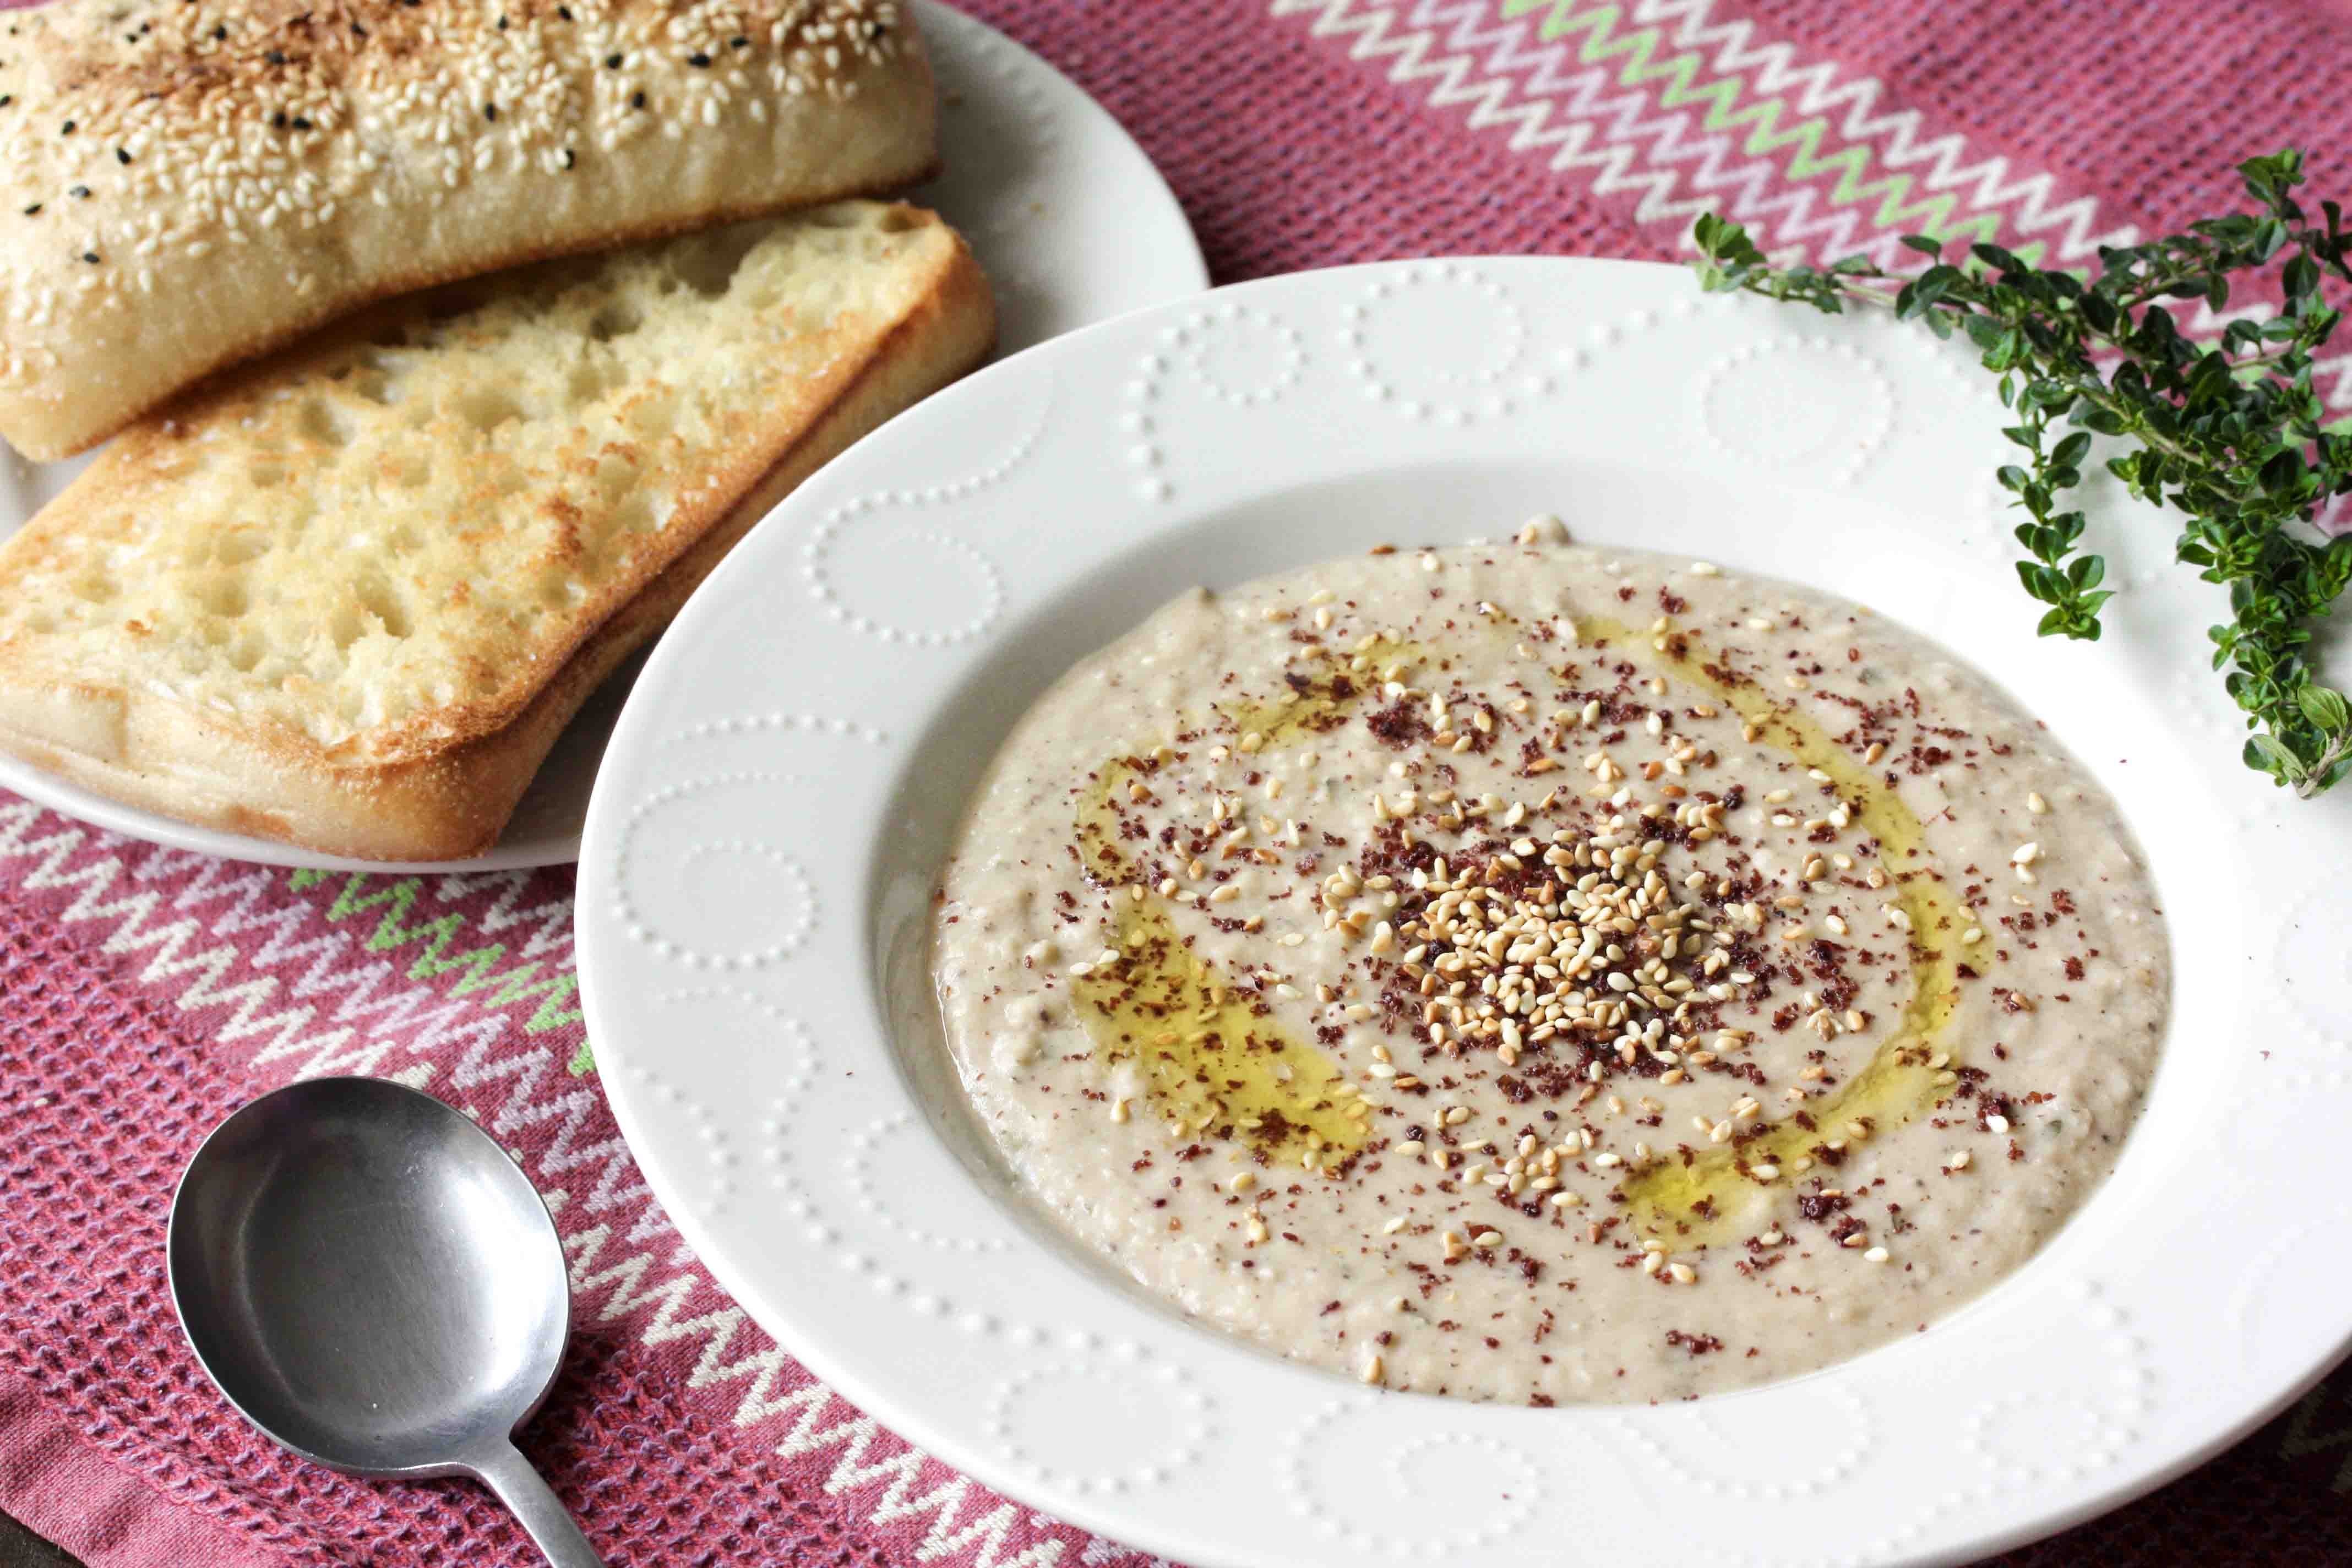 White bean and za'atar soup with toasted sesame seeds